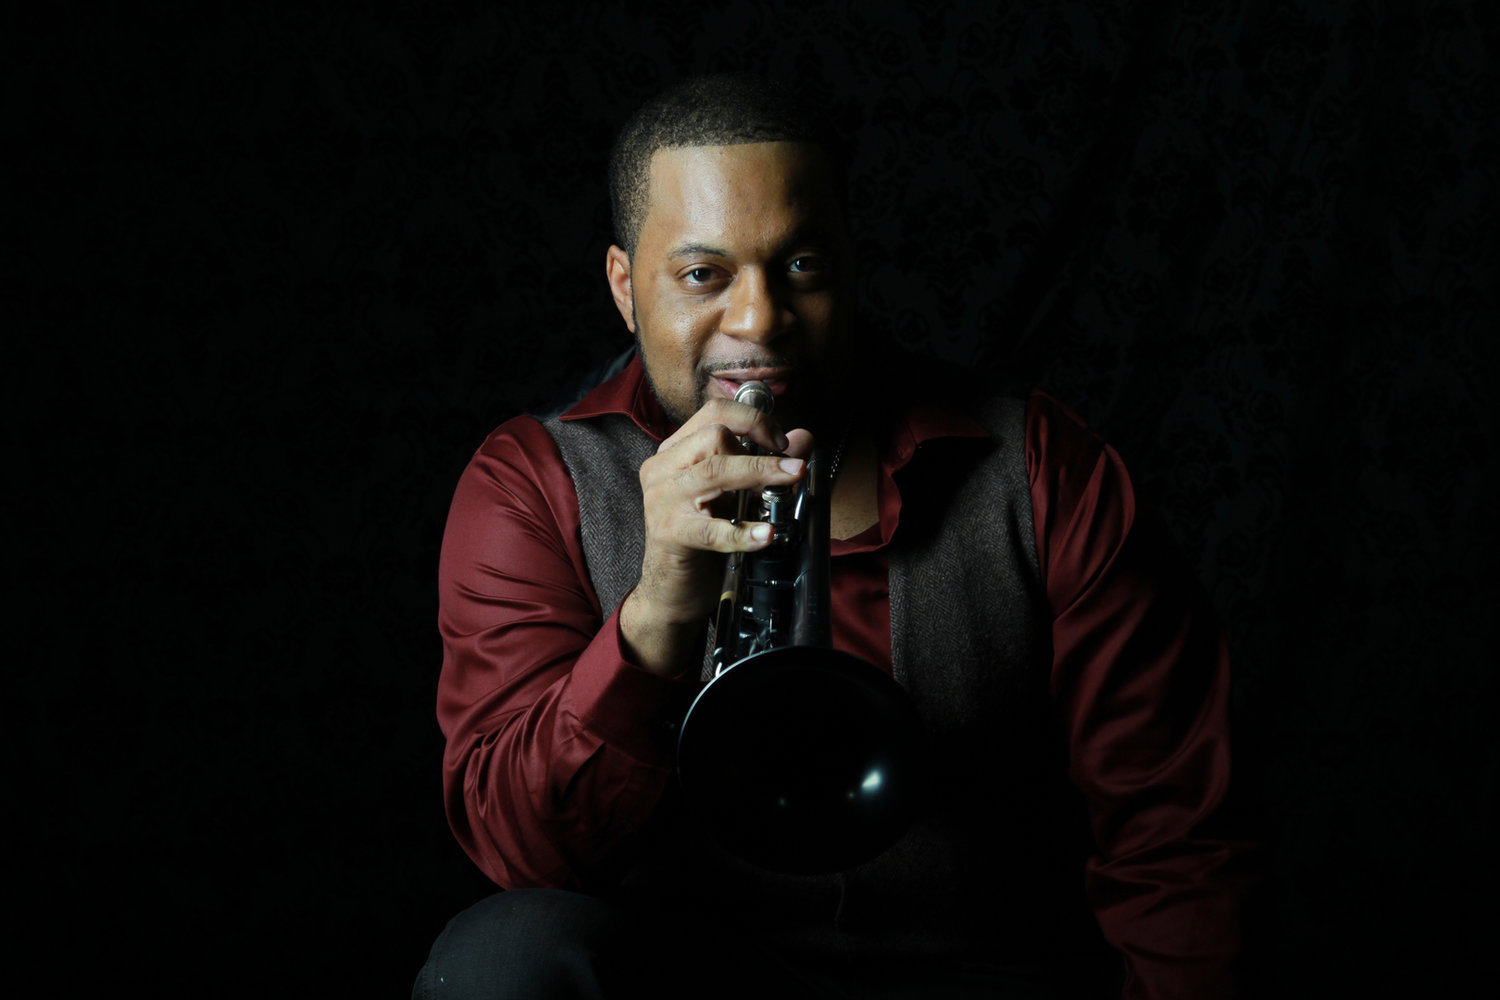 Detroit trumpeter Lin Rountree calls himself “an R&B man” who admires the great jazz trumpeters but brings his own fire to the genre of smooth jazz.